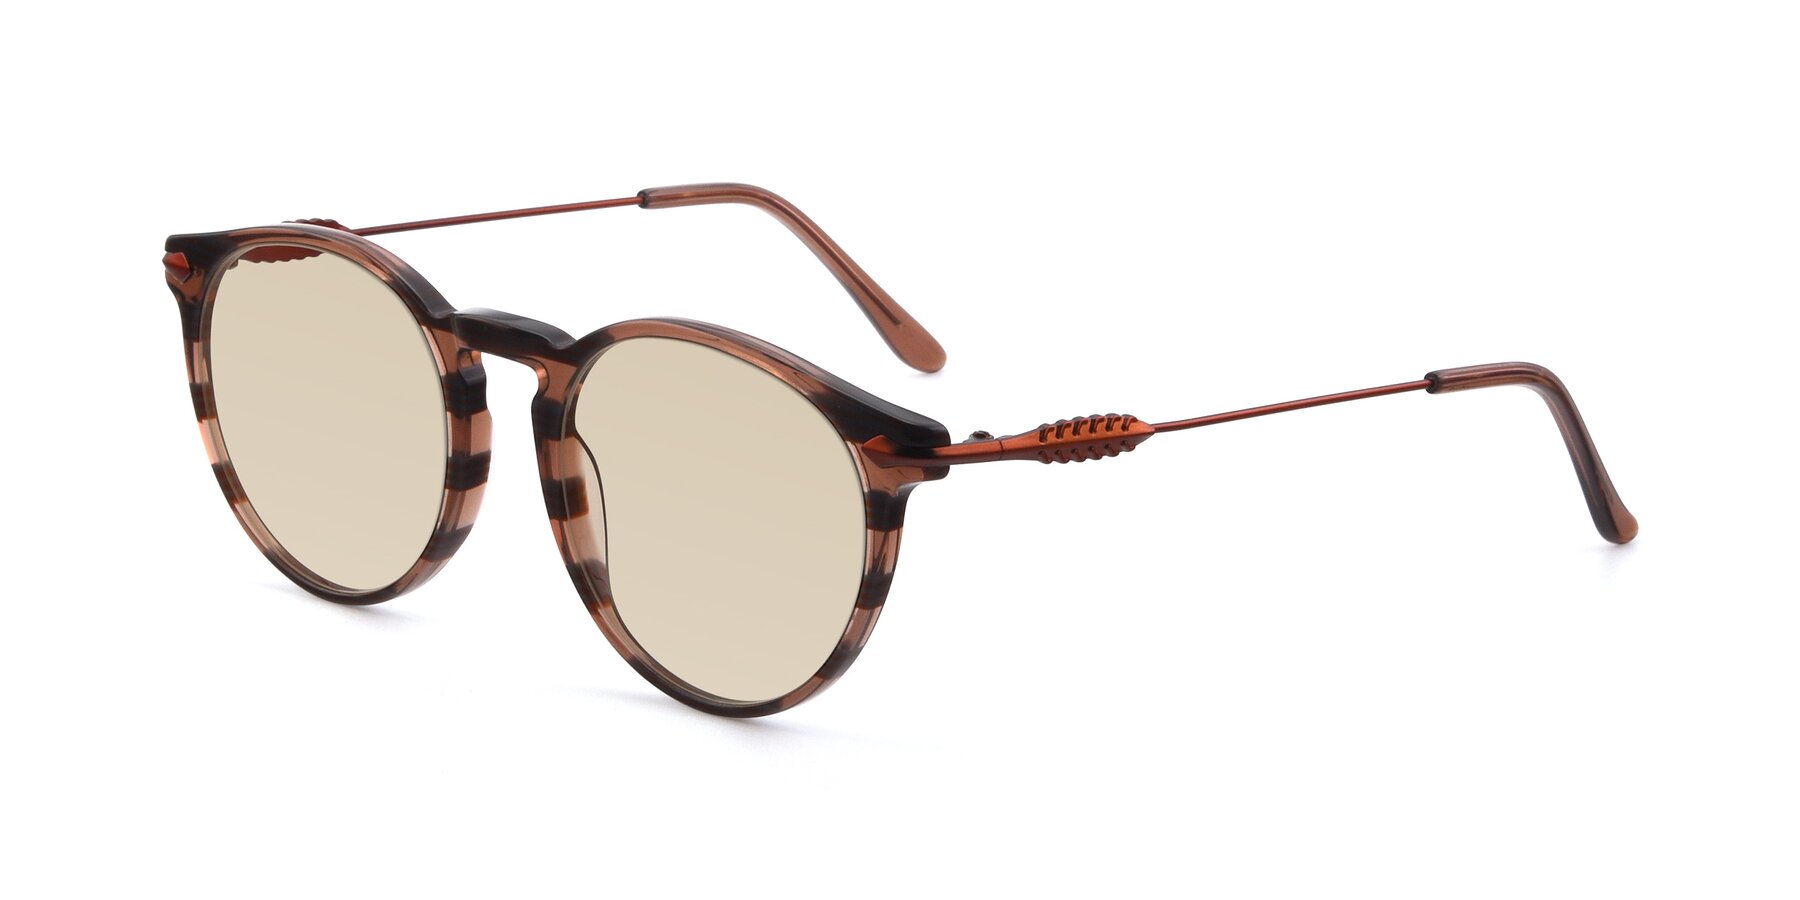 Angle of 17660 in Stripe Brown with Light Brown Tinted Lenses